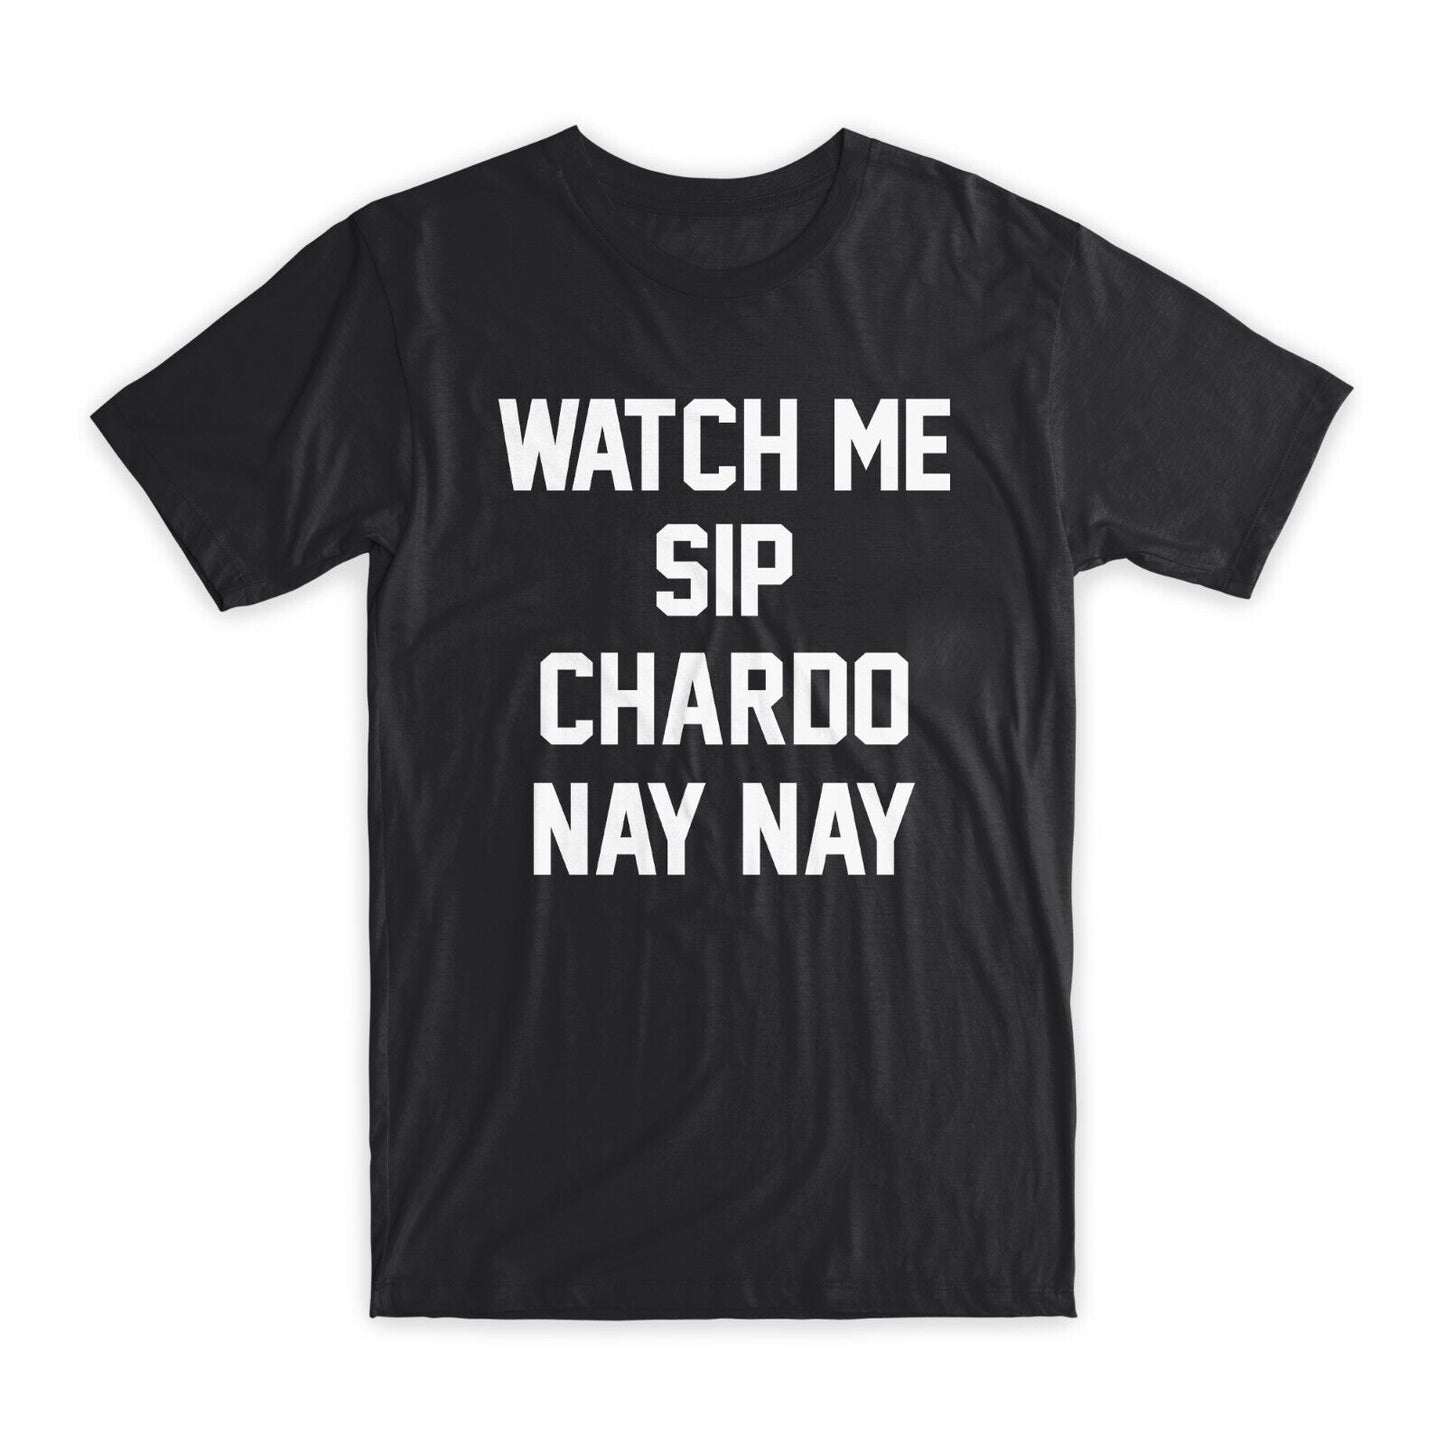 Watch Me Sip Chardo Nay Nay T-Shirt Premium Cotton Crew Neck Funny Tees Gift NEW